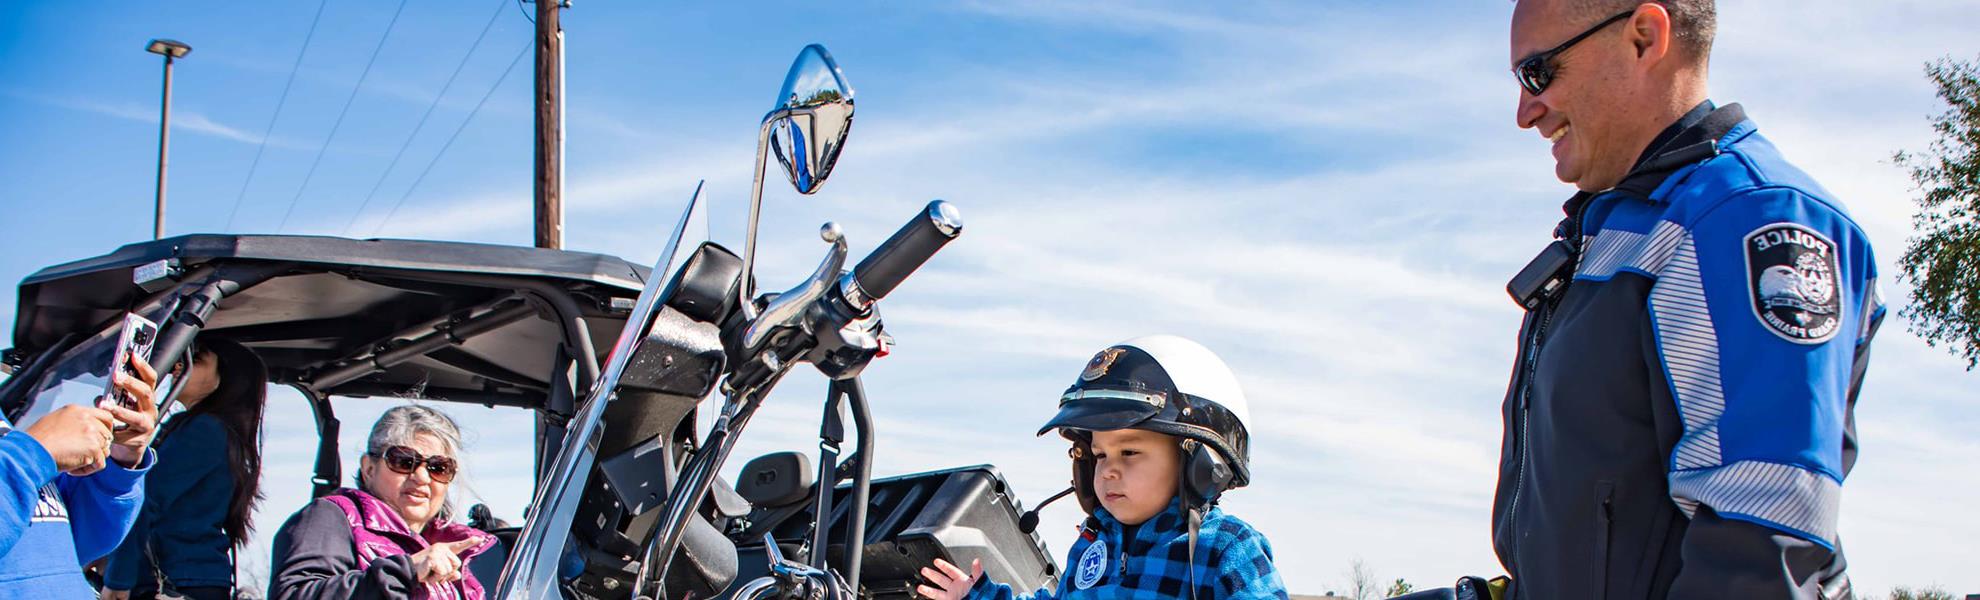 kid on police motorcycle